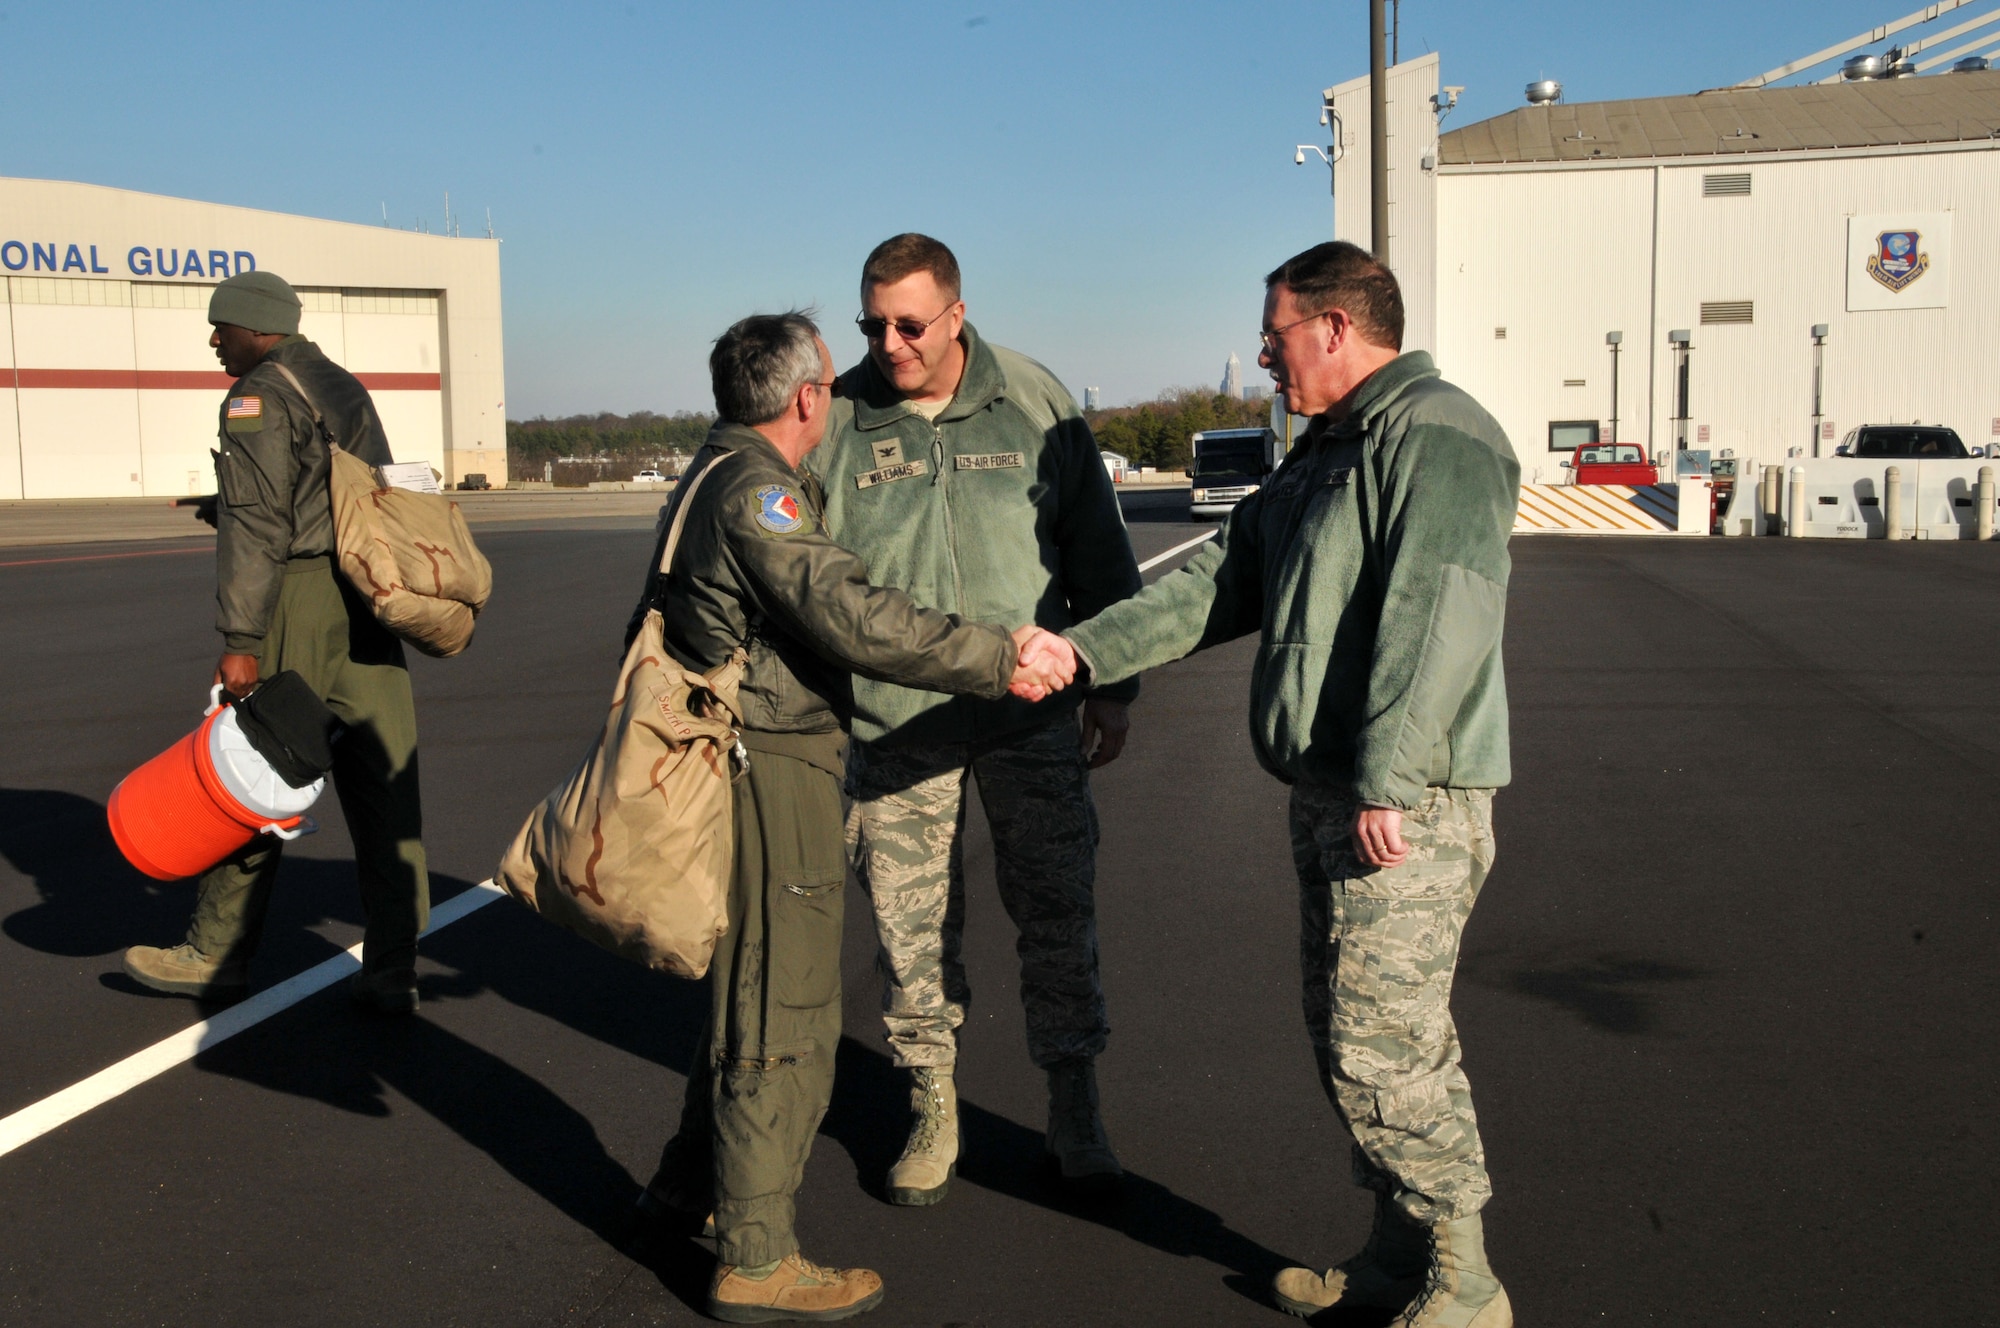 U.S. Air Force Col. Quincy Huneycutt, Vice Wing Commander, 145th Airlift Wing, congratulates Senior Master Sgt. Philip H. Smith after Smith completed his final flight onboard a 145th AW C-130 Hercules aircraft.  He served more than 35 years in the military, 24 of those years were as a tactic loadmaster for the 156th Airlift Squadron.  Smith’s fini flight was held at the North Carolina Air National Guard base, Charlotte-Douglas Intl. airport, January 16, 2014 in honor of his retirement.  (Air National Guard photo by Master Sgt. Patricia F. Moran, 145th Public Affairs/Released)